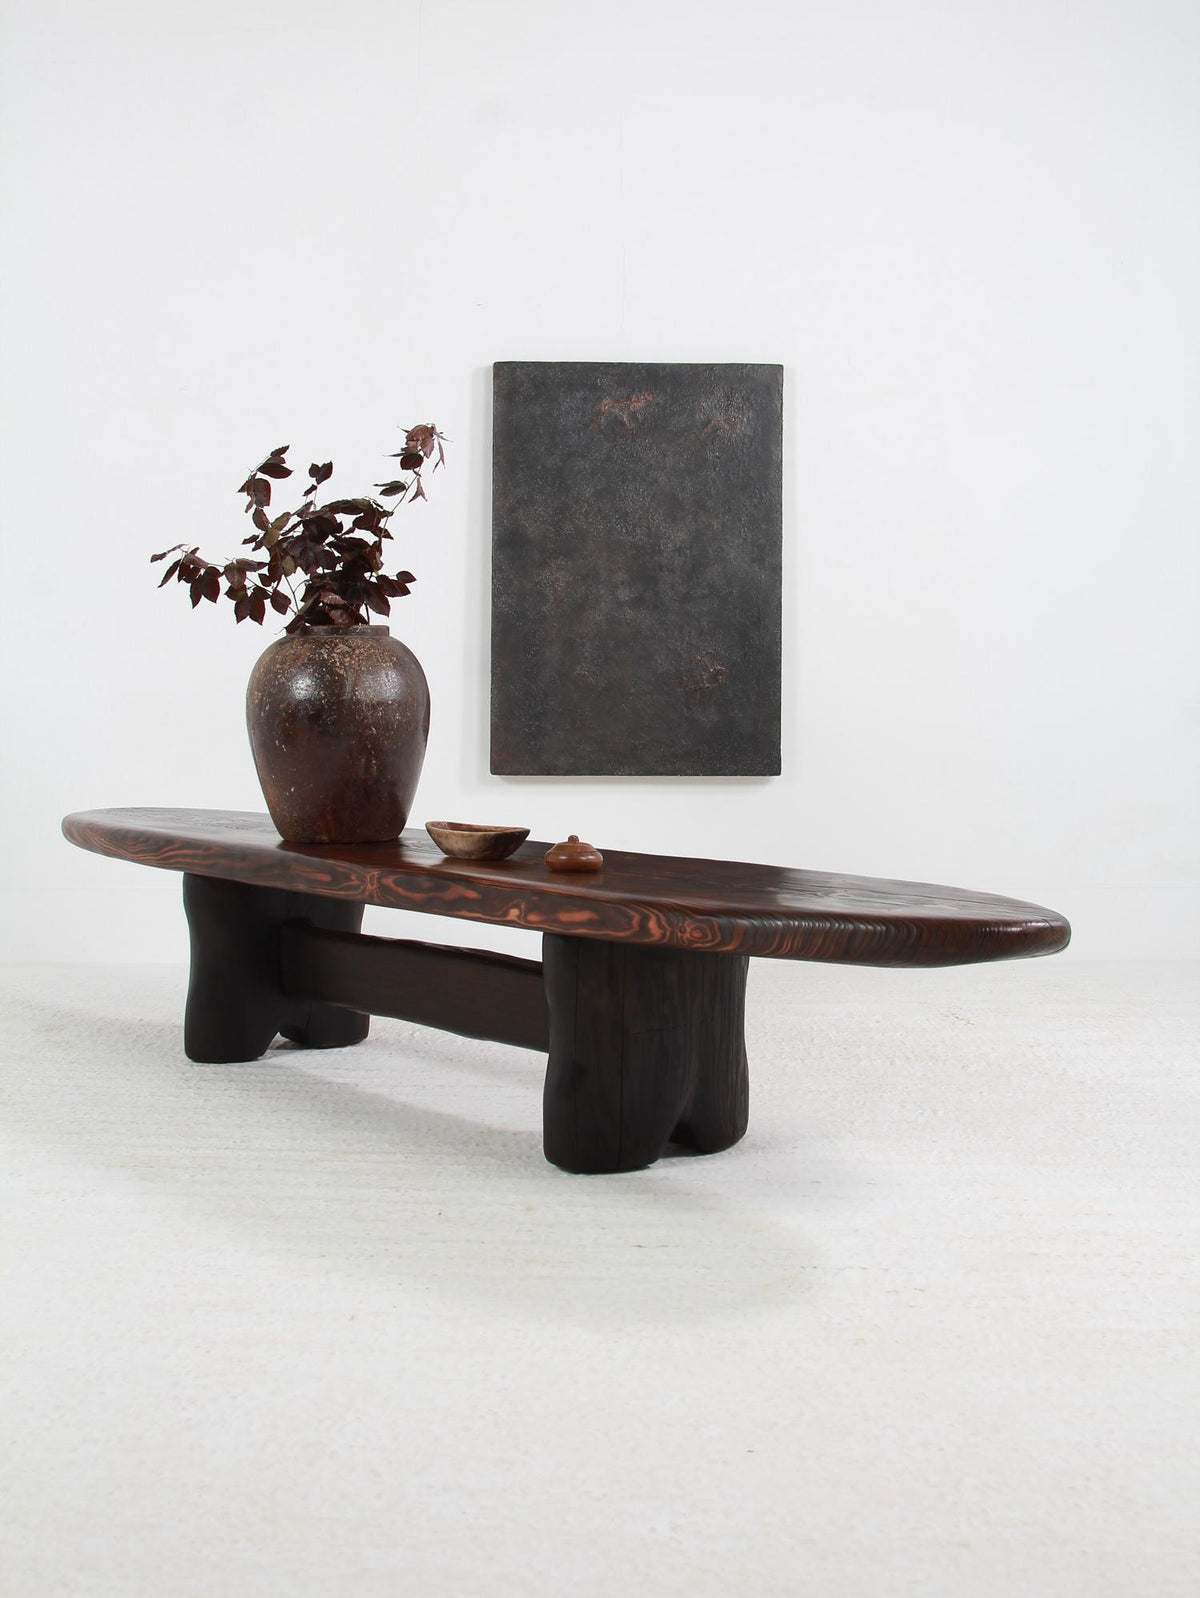 A Very Impressive Organic Craftsman Japanese Inspired Long Bench /Table. Price on request